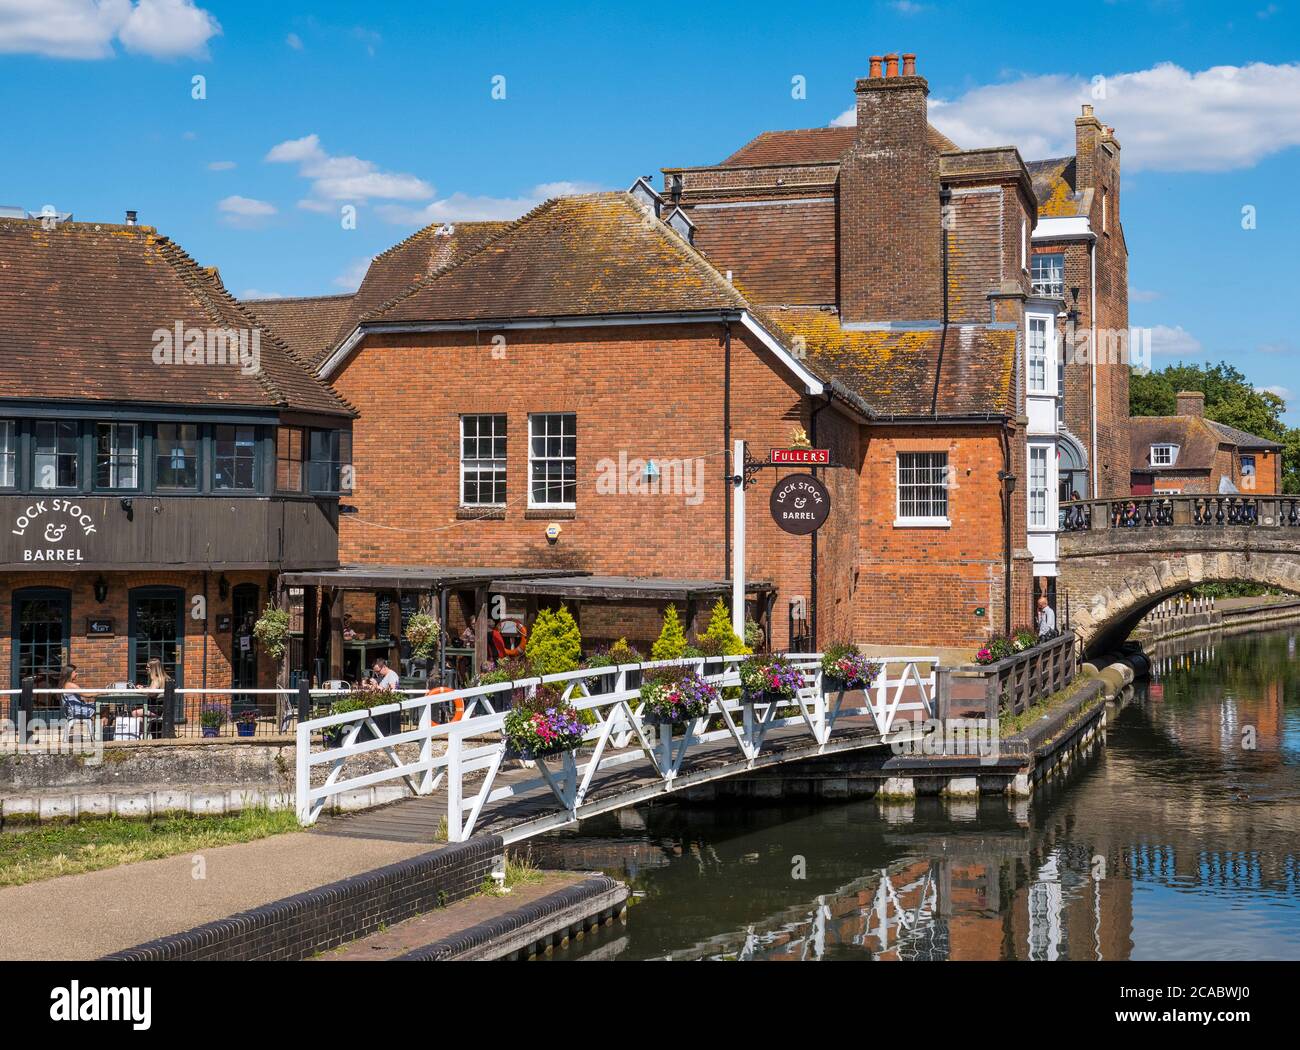 The Lock stock & Barrel, Newbury on the River Kennett, Central Newbury, Berkshire, Angleterre, Royaume-Uni, GB. Banque D'Images